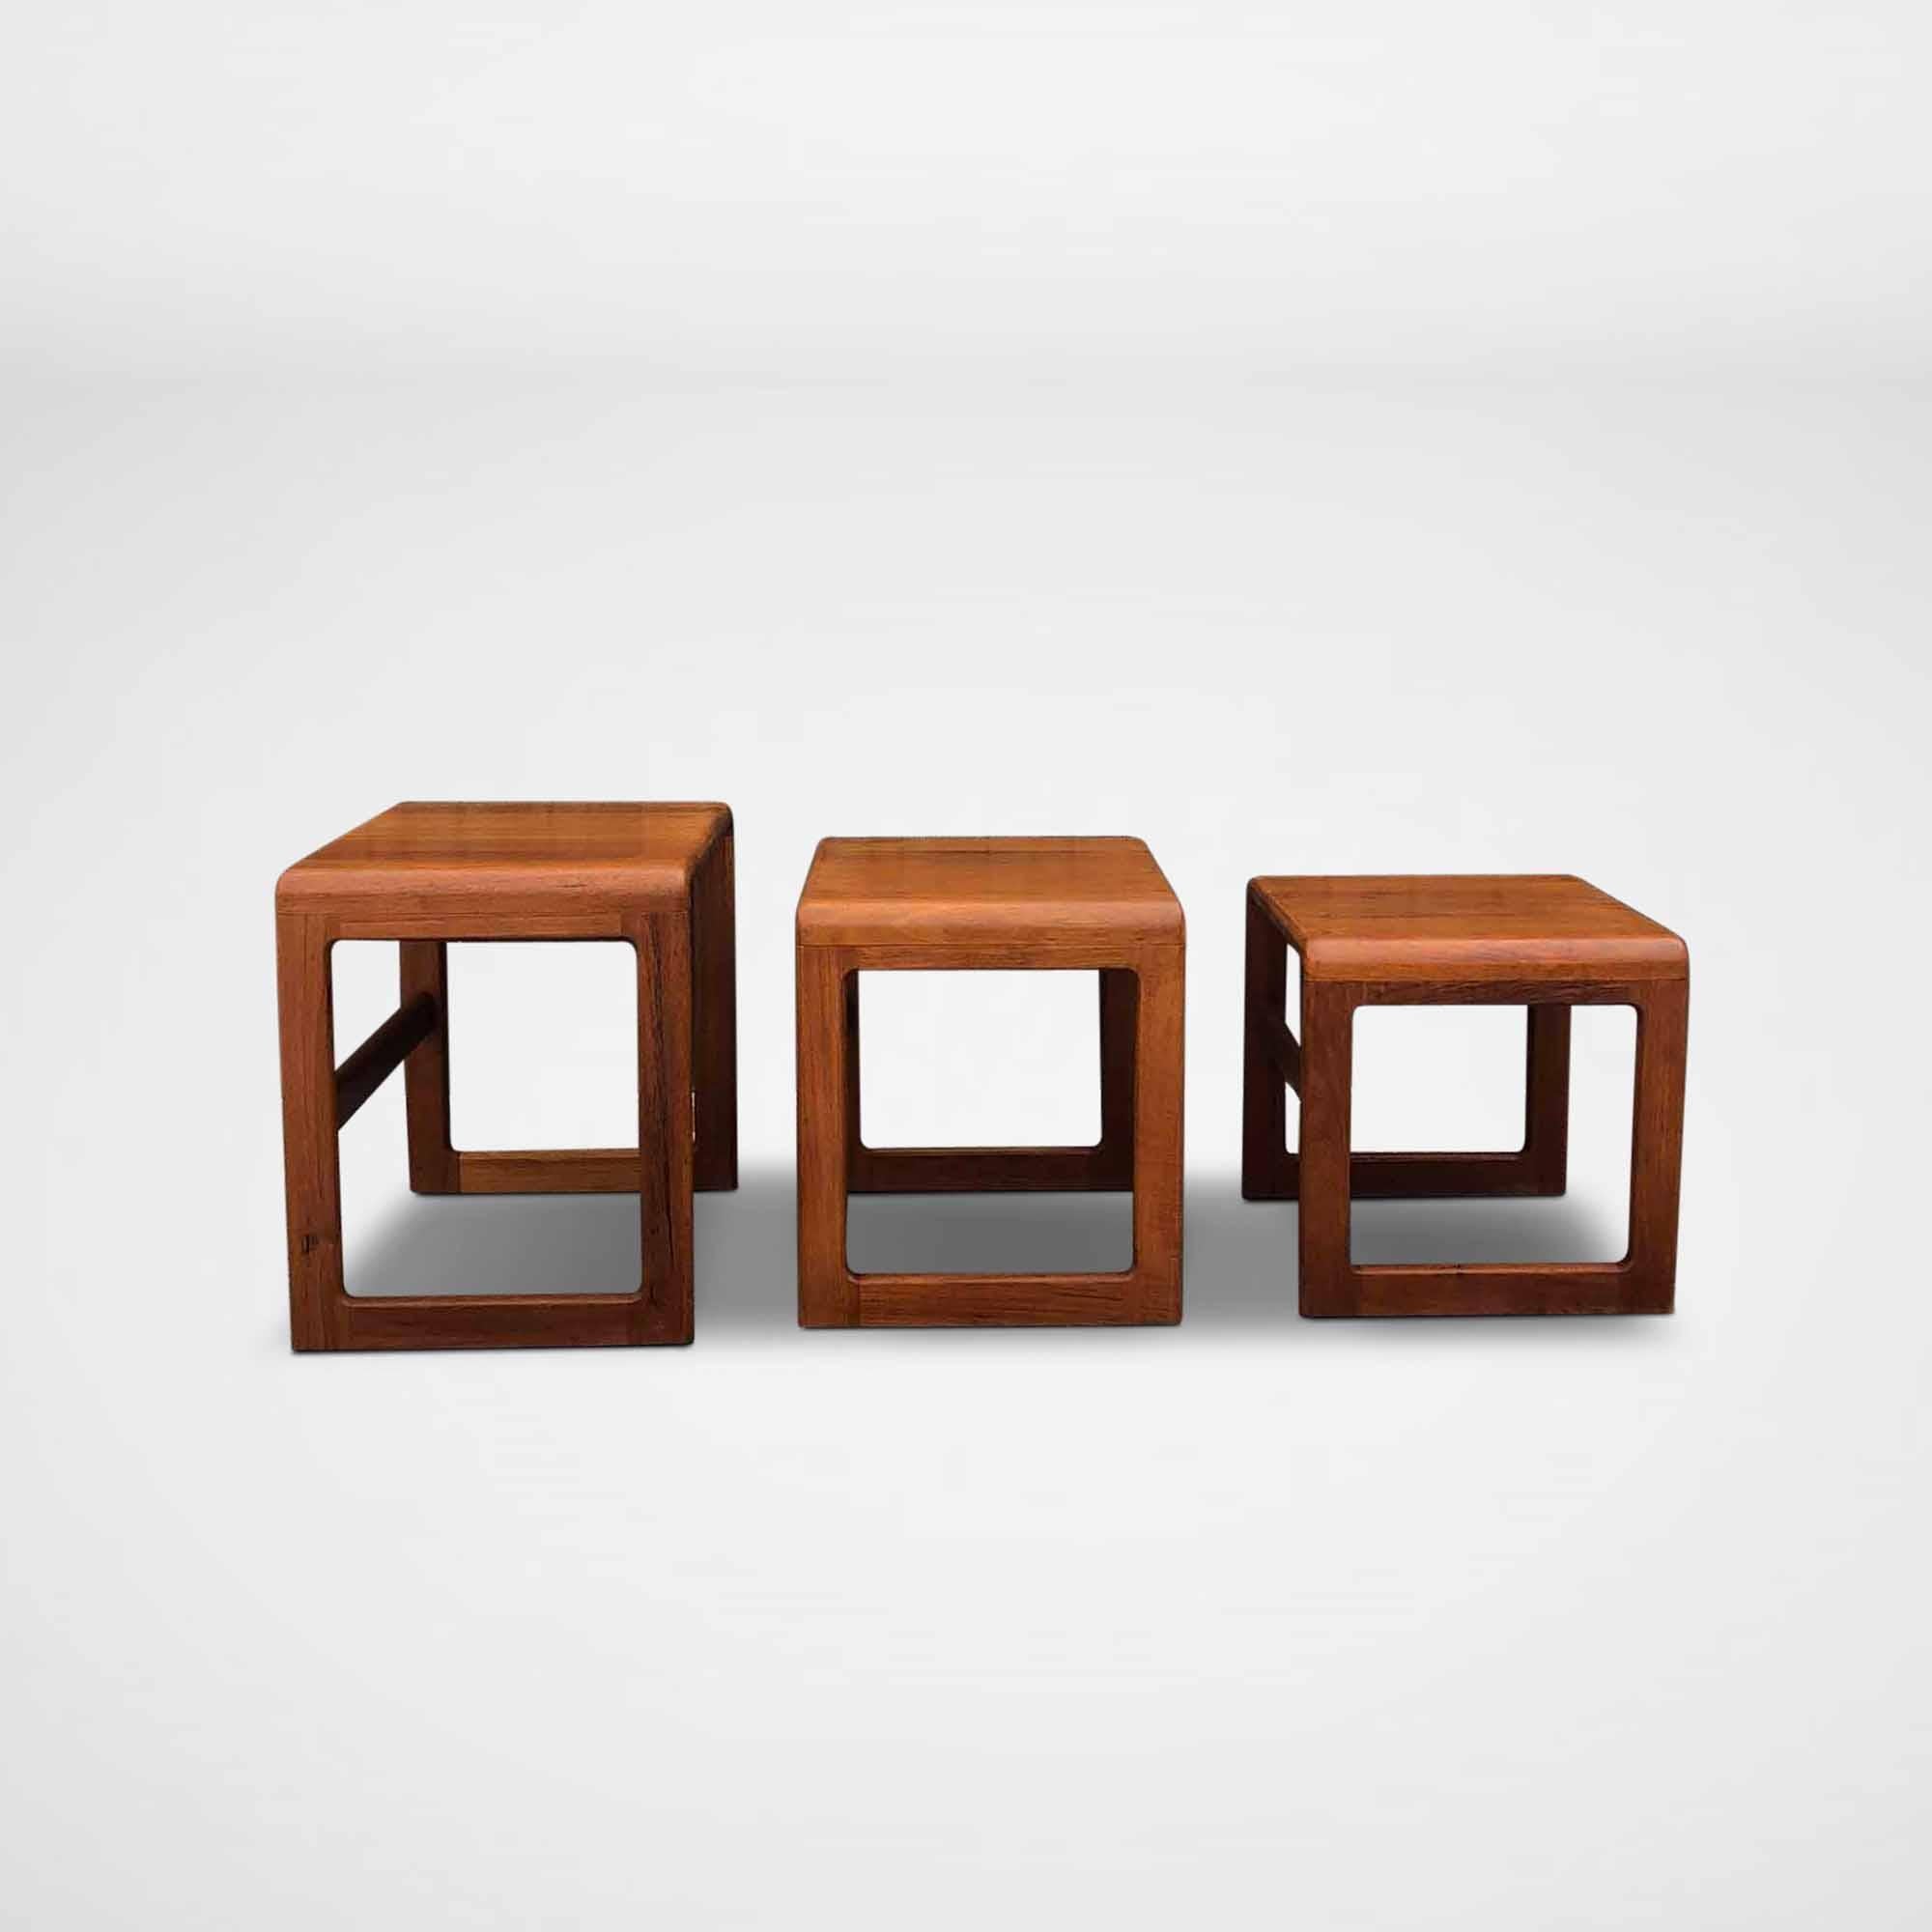 Vintage set of 3 Dyrlund side tables in solid wood. The tables were made in Denmark. These nesting tables slide under each other and do not use a lot of space when stored away. The original attribution mark of Dyrlund is placed on one of the tables.